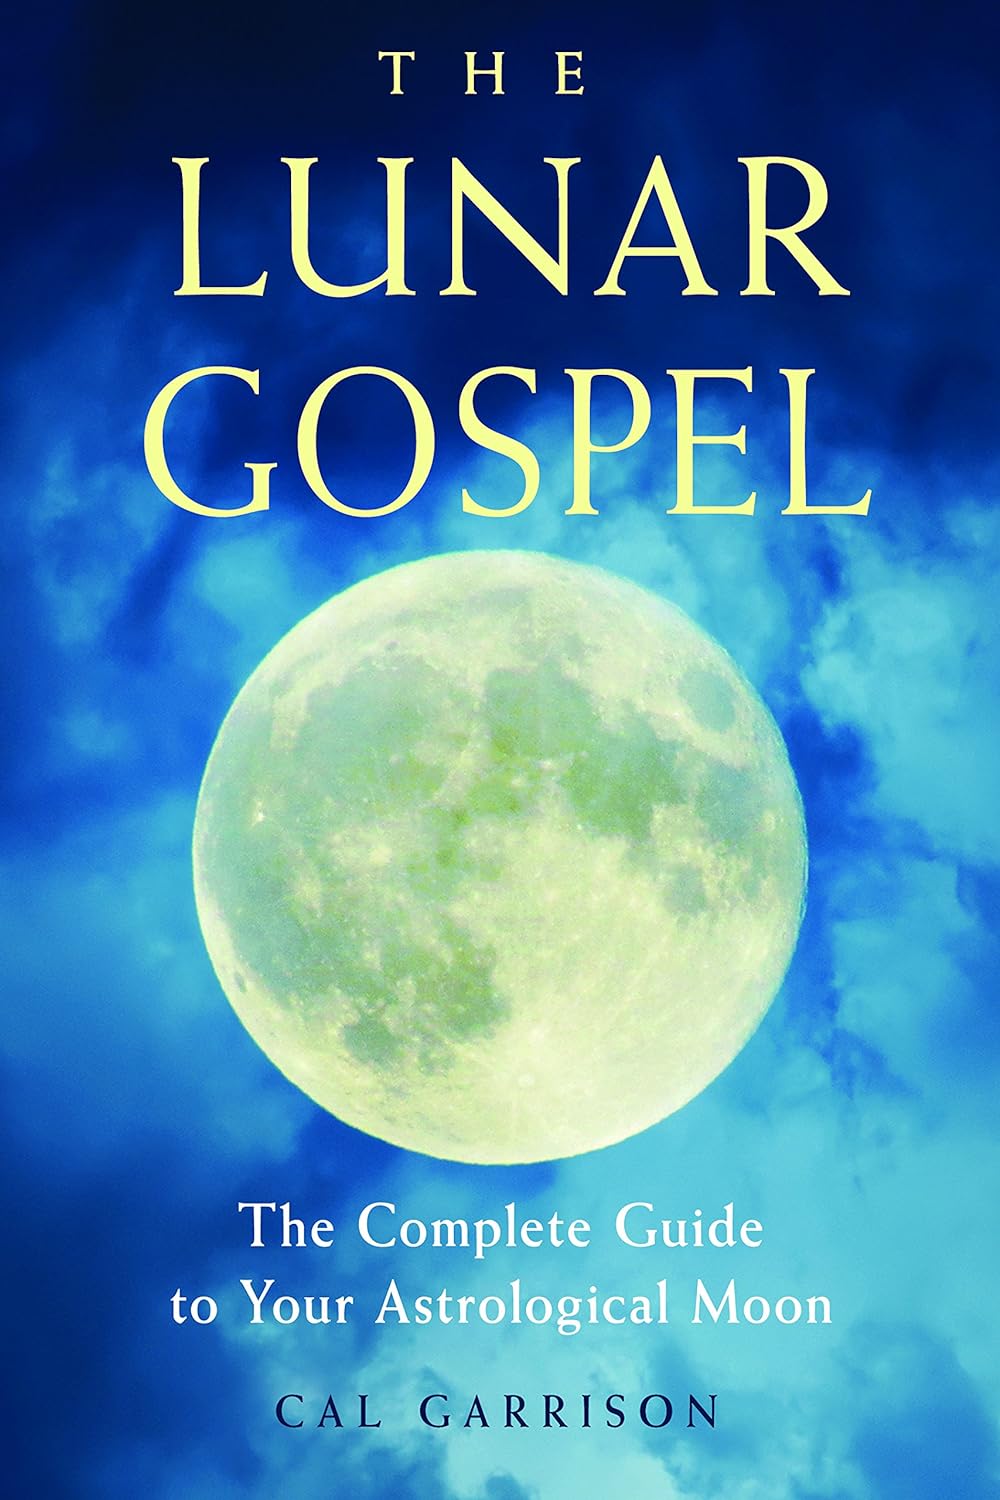 The Lunar Gospel: The Complete Guide to Your Astrological Moon